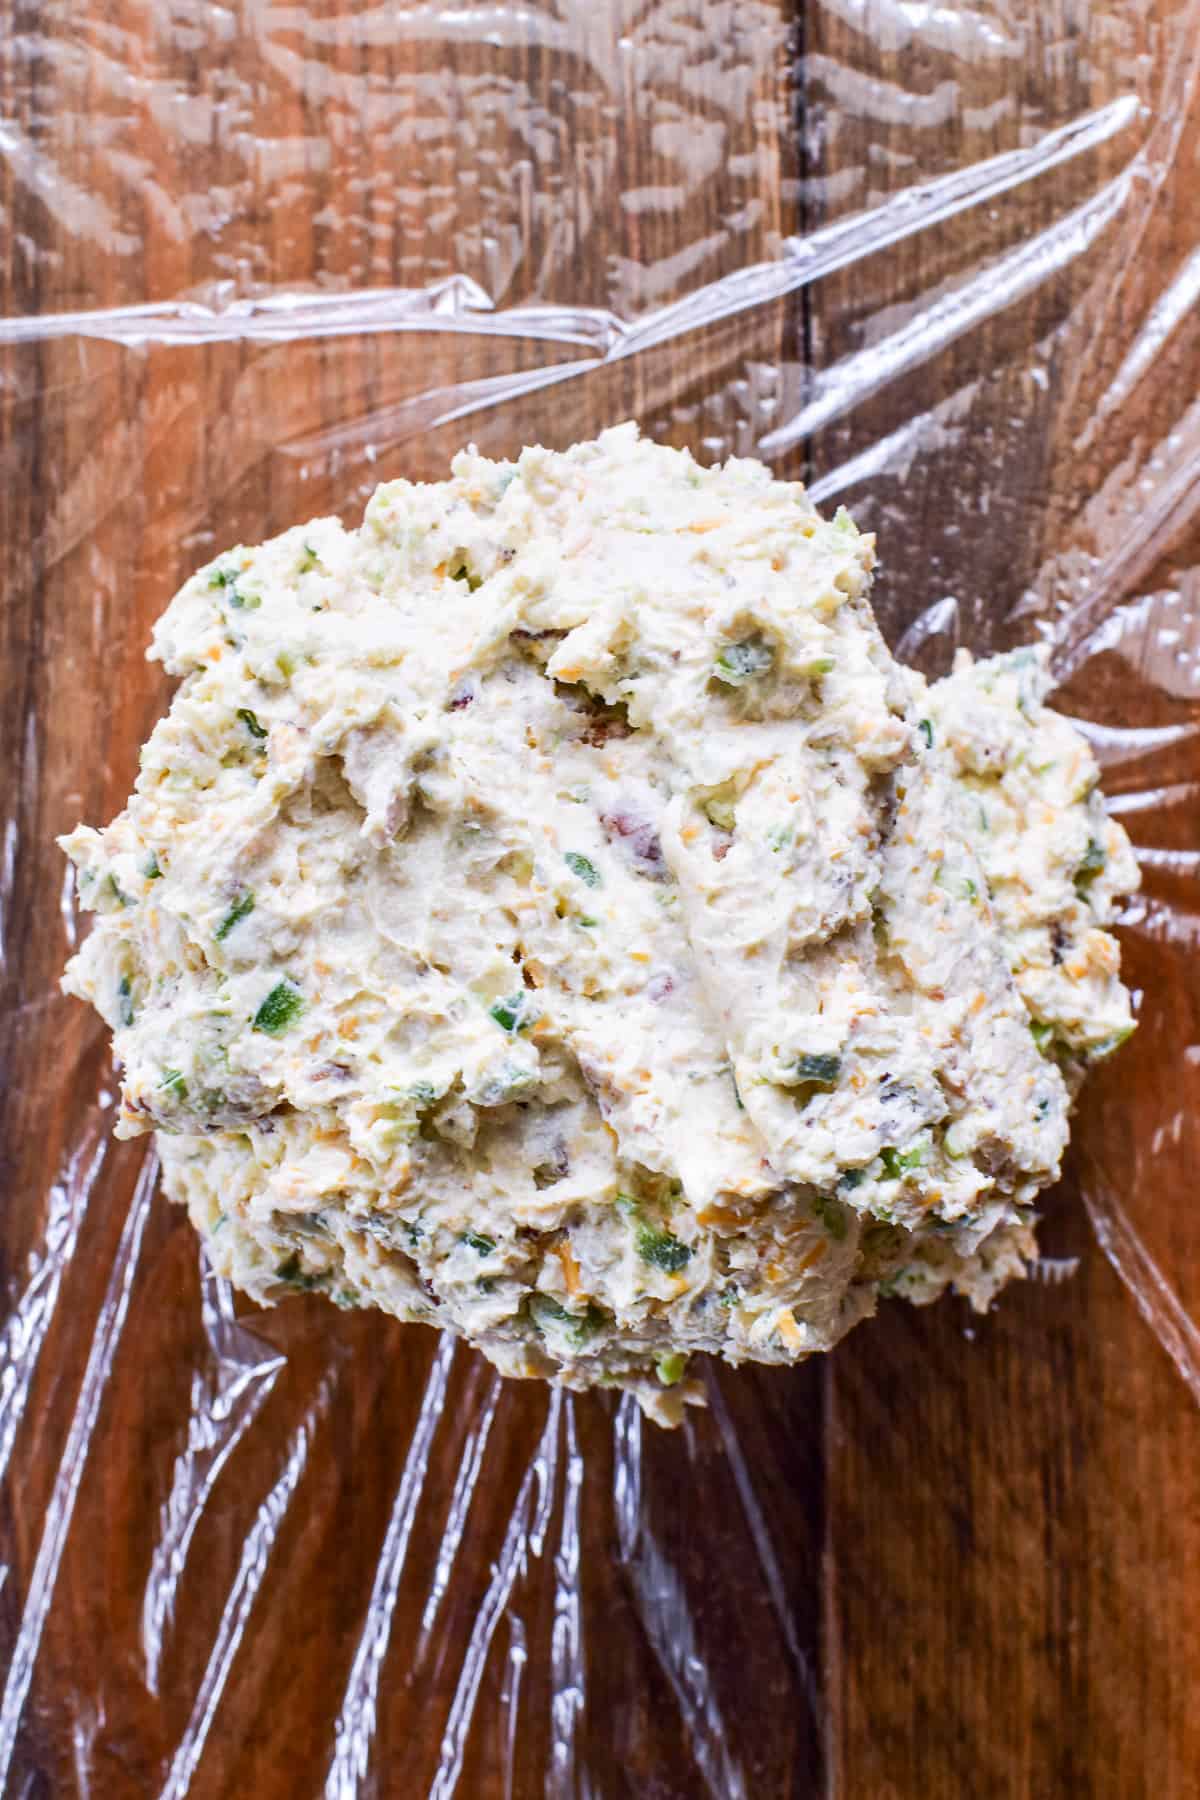 Jalapeño Popper Cheese Ball being wrapped in plastic wrap